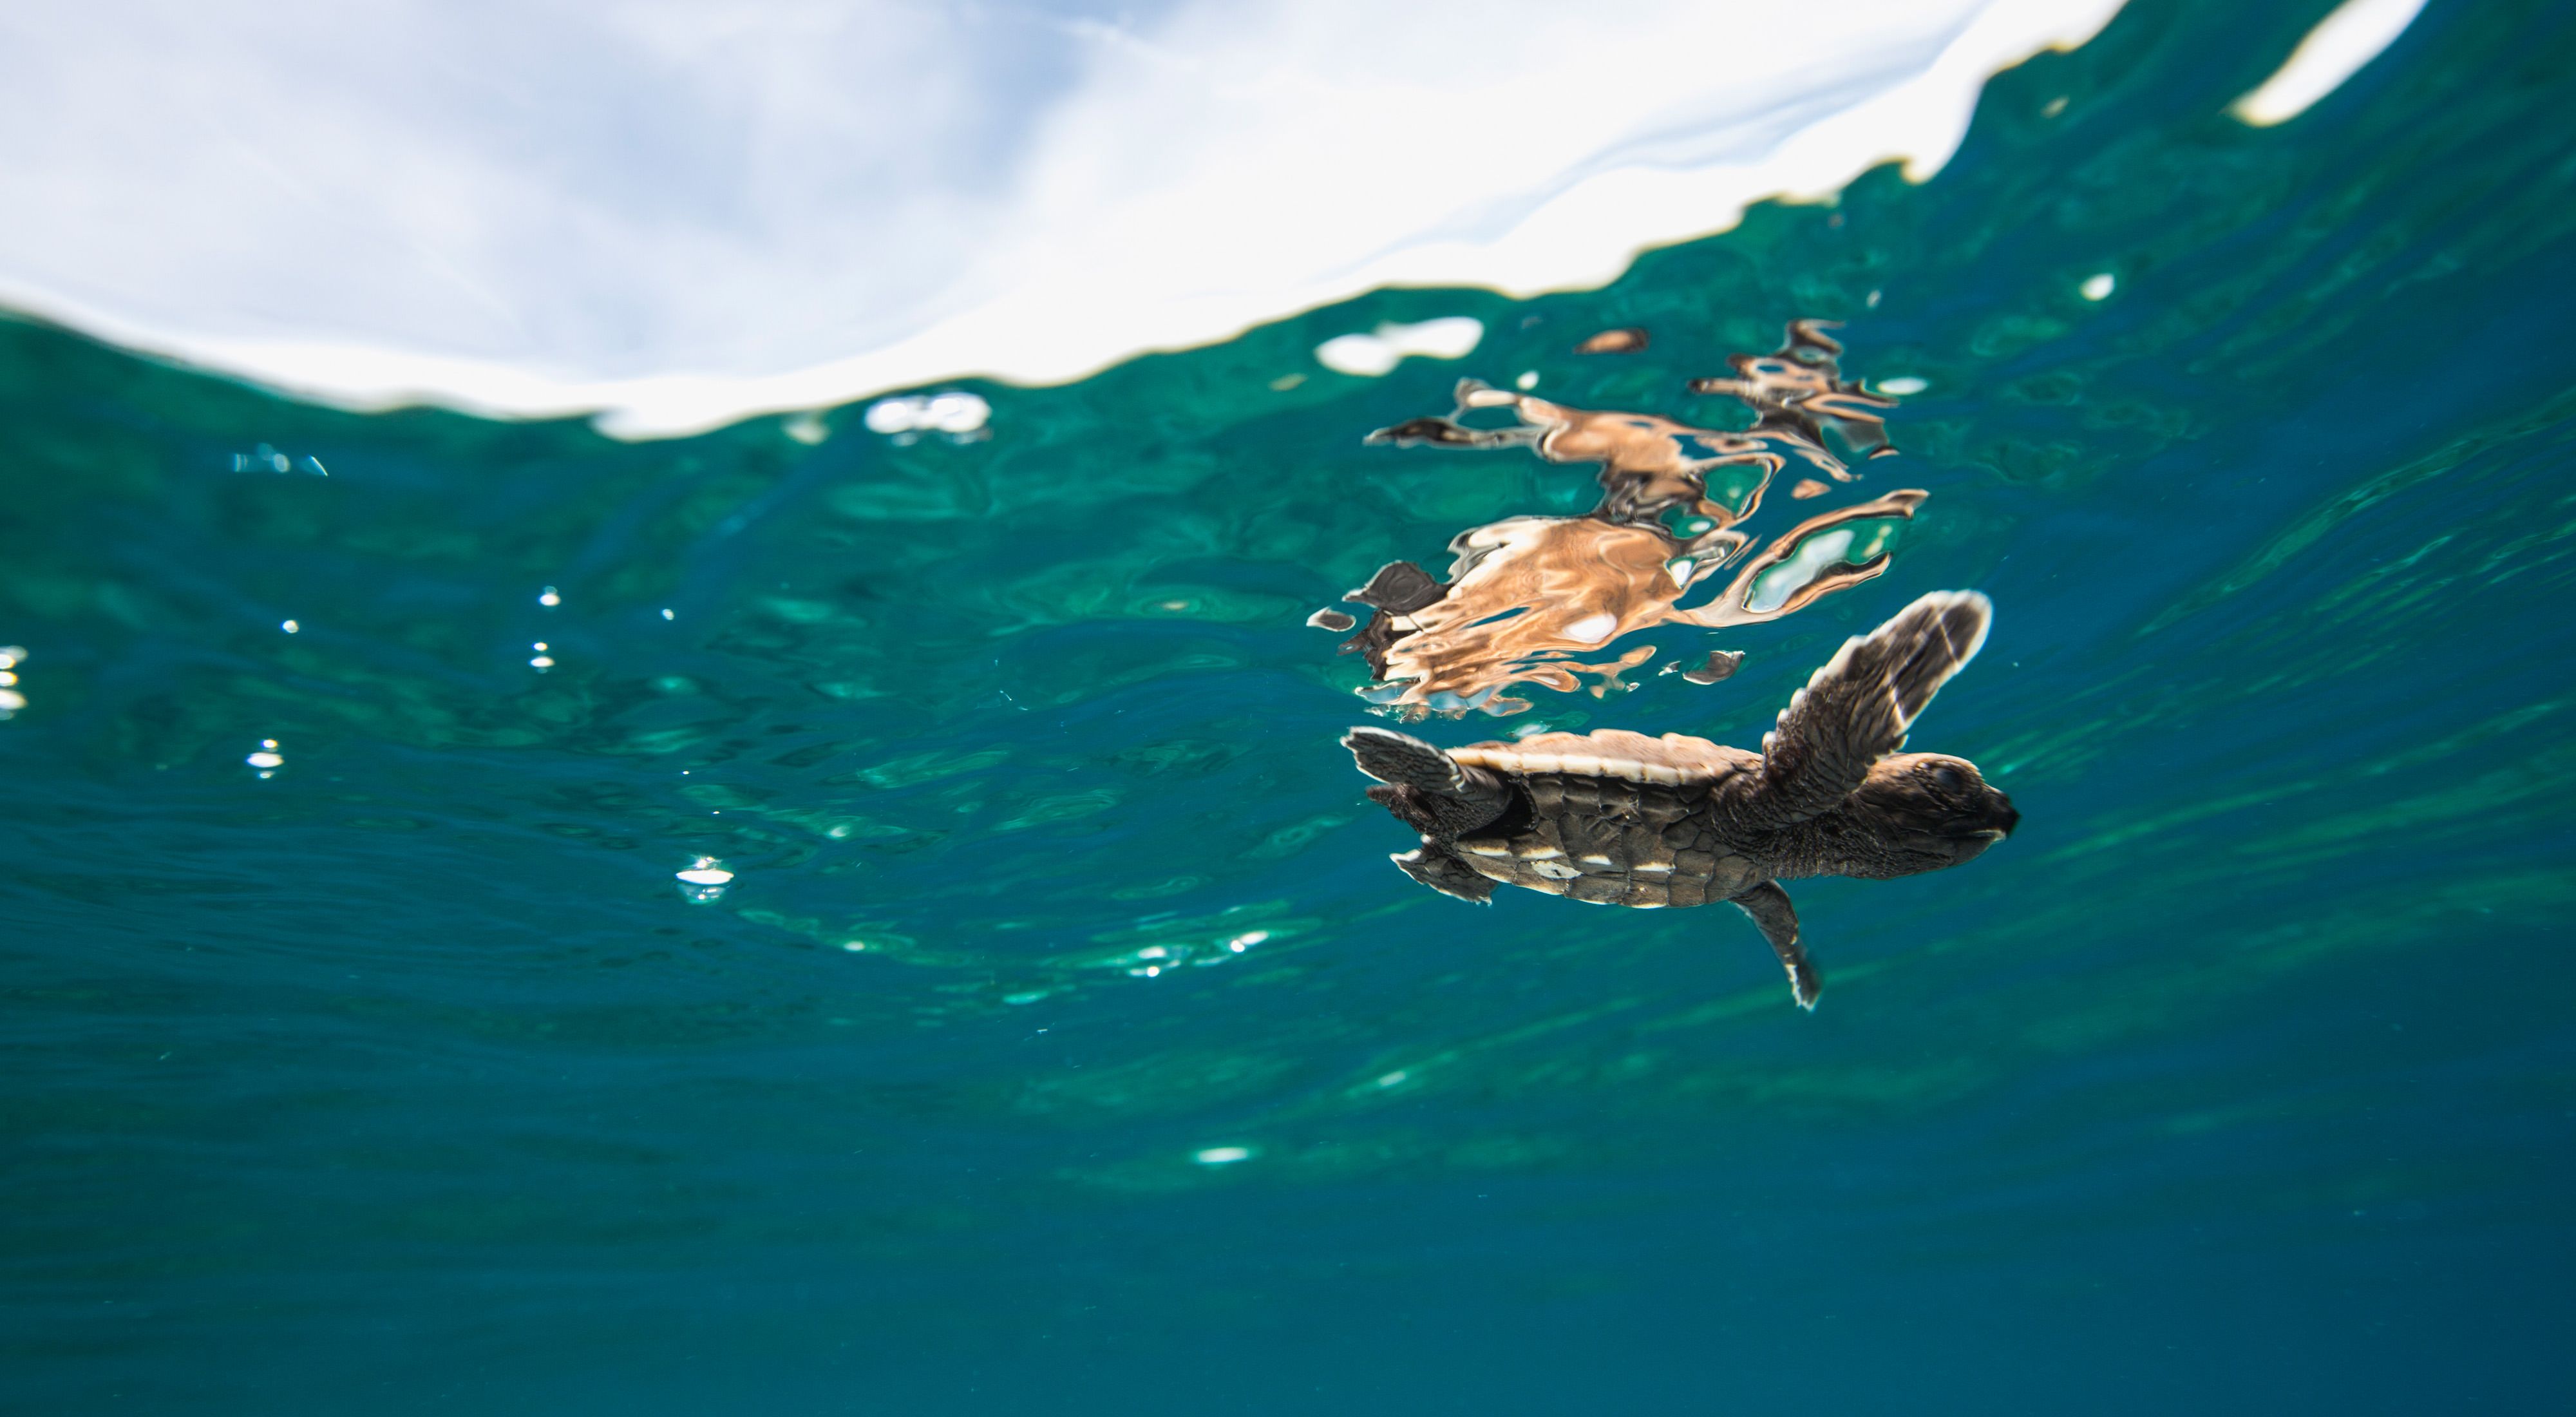 A baby turtle swims at the surface of the water.